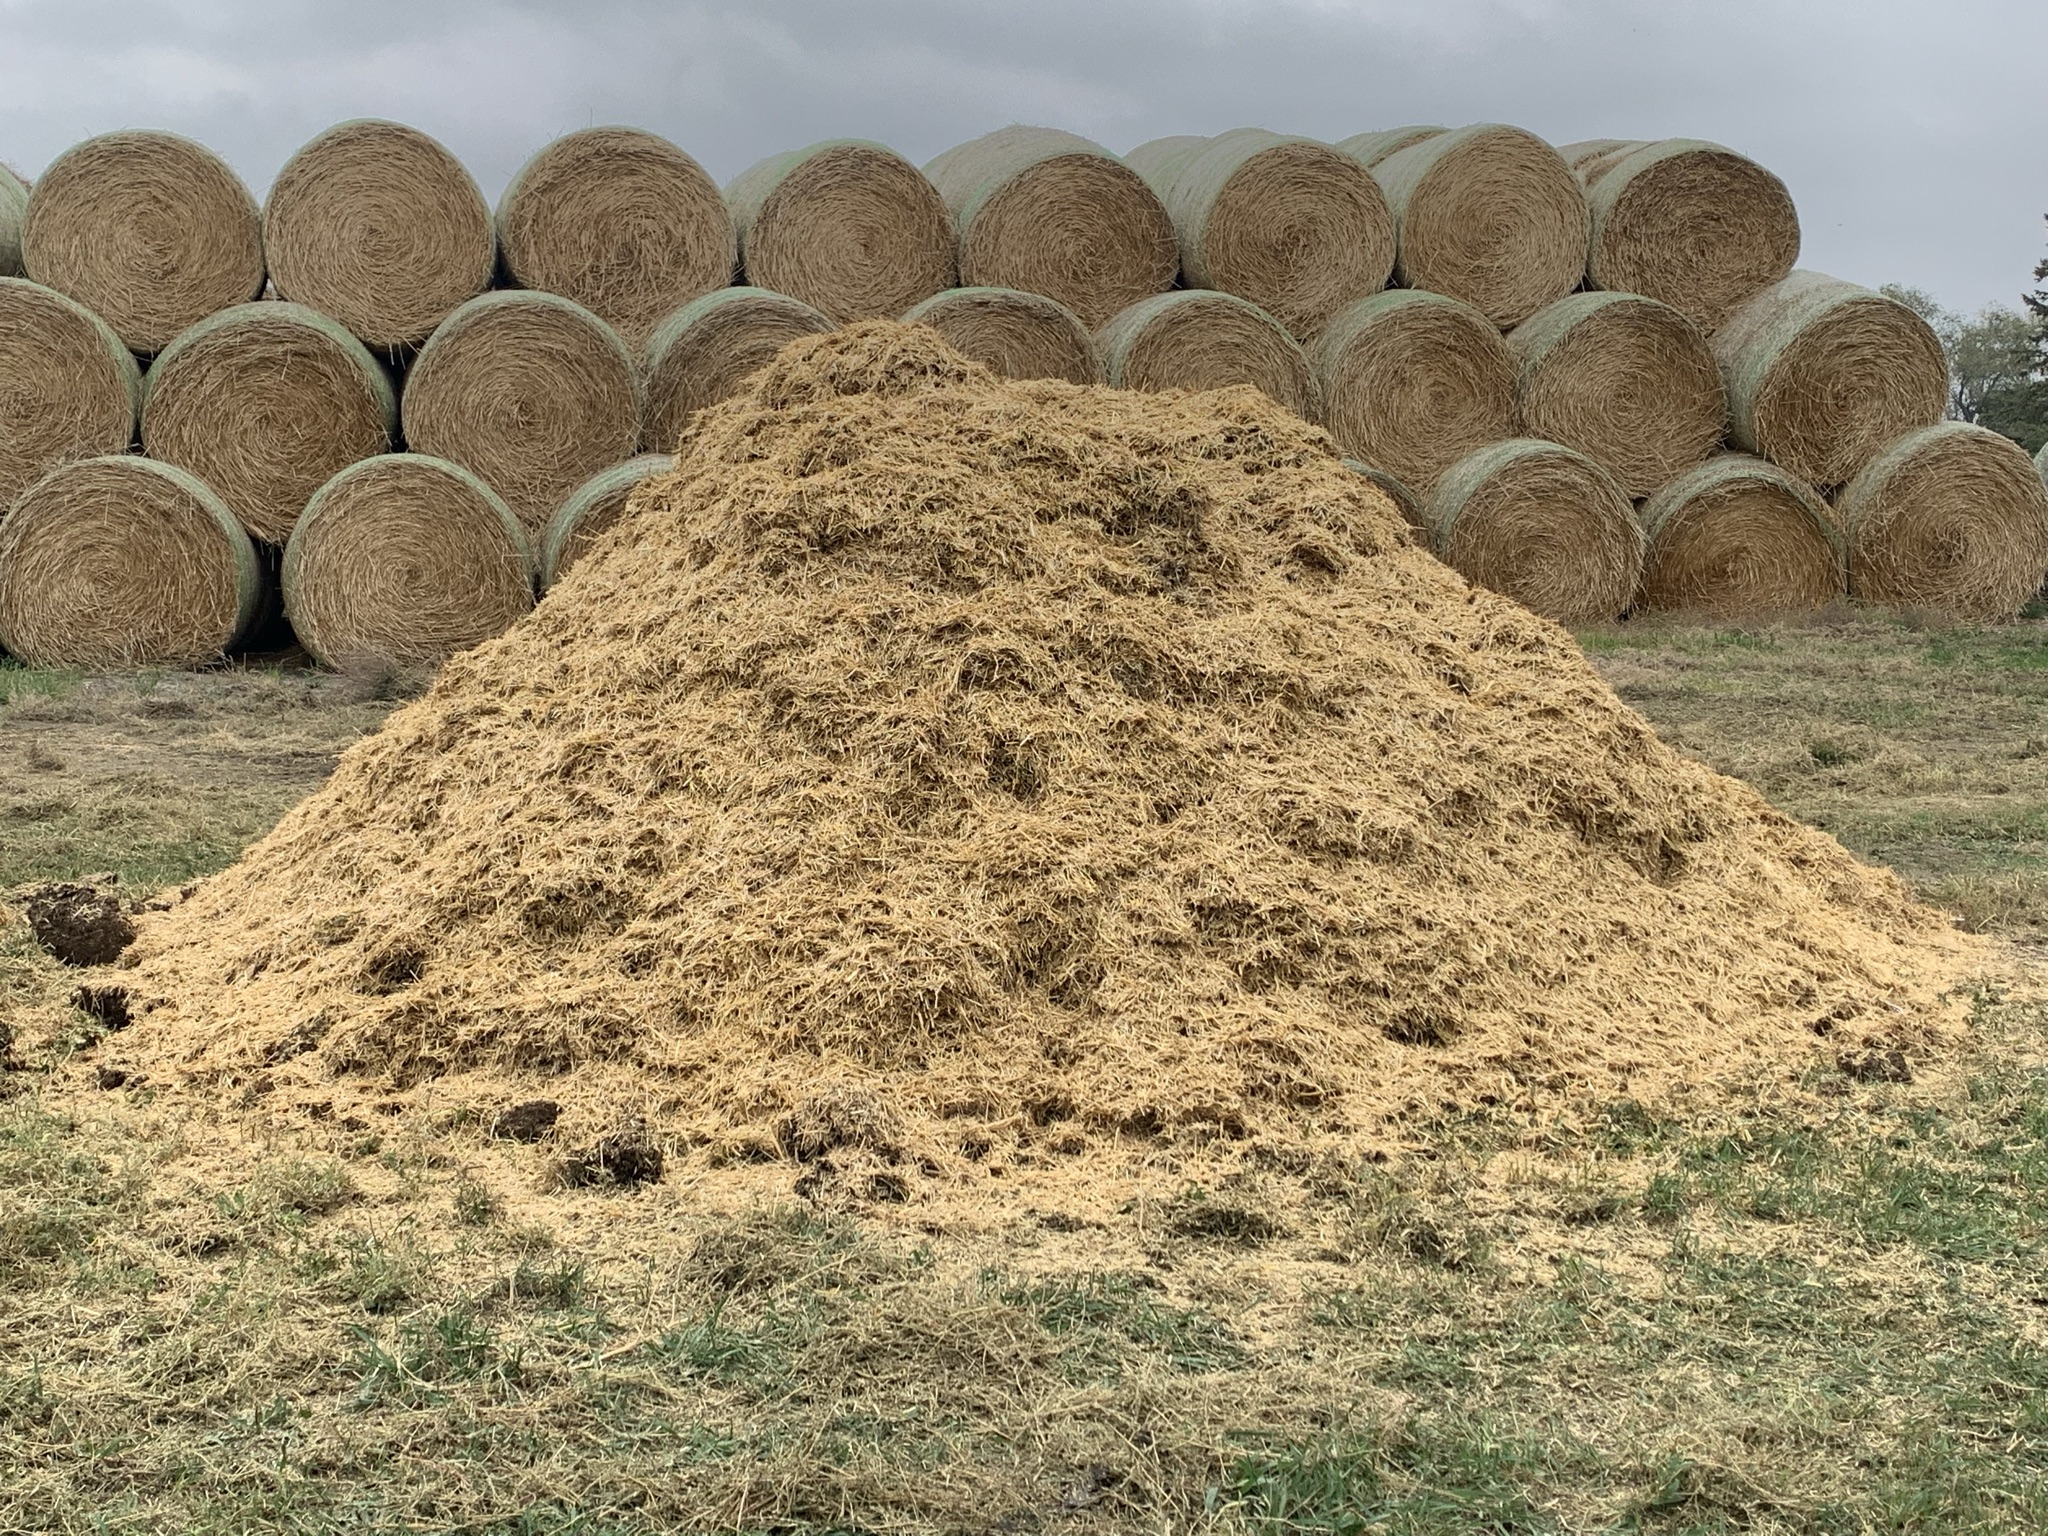 dead livestock compost pile with hay on top